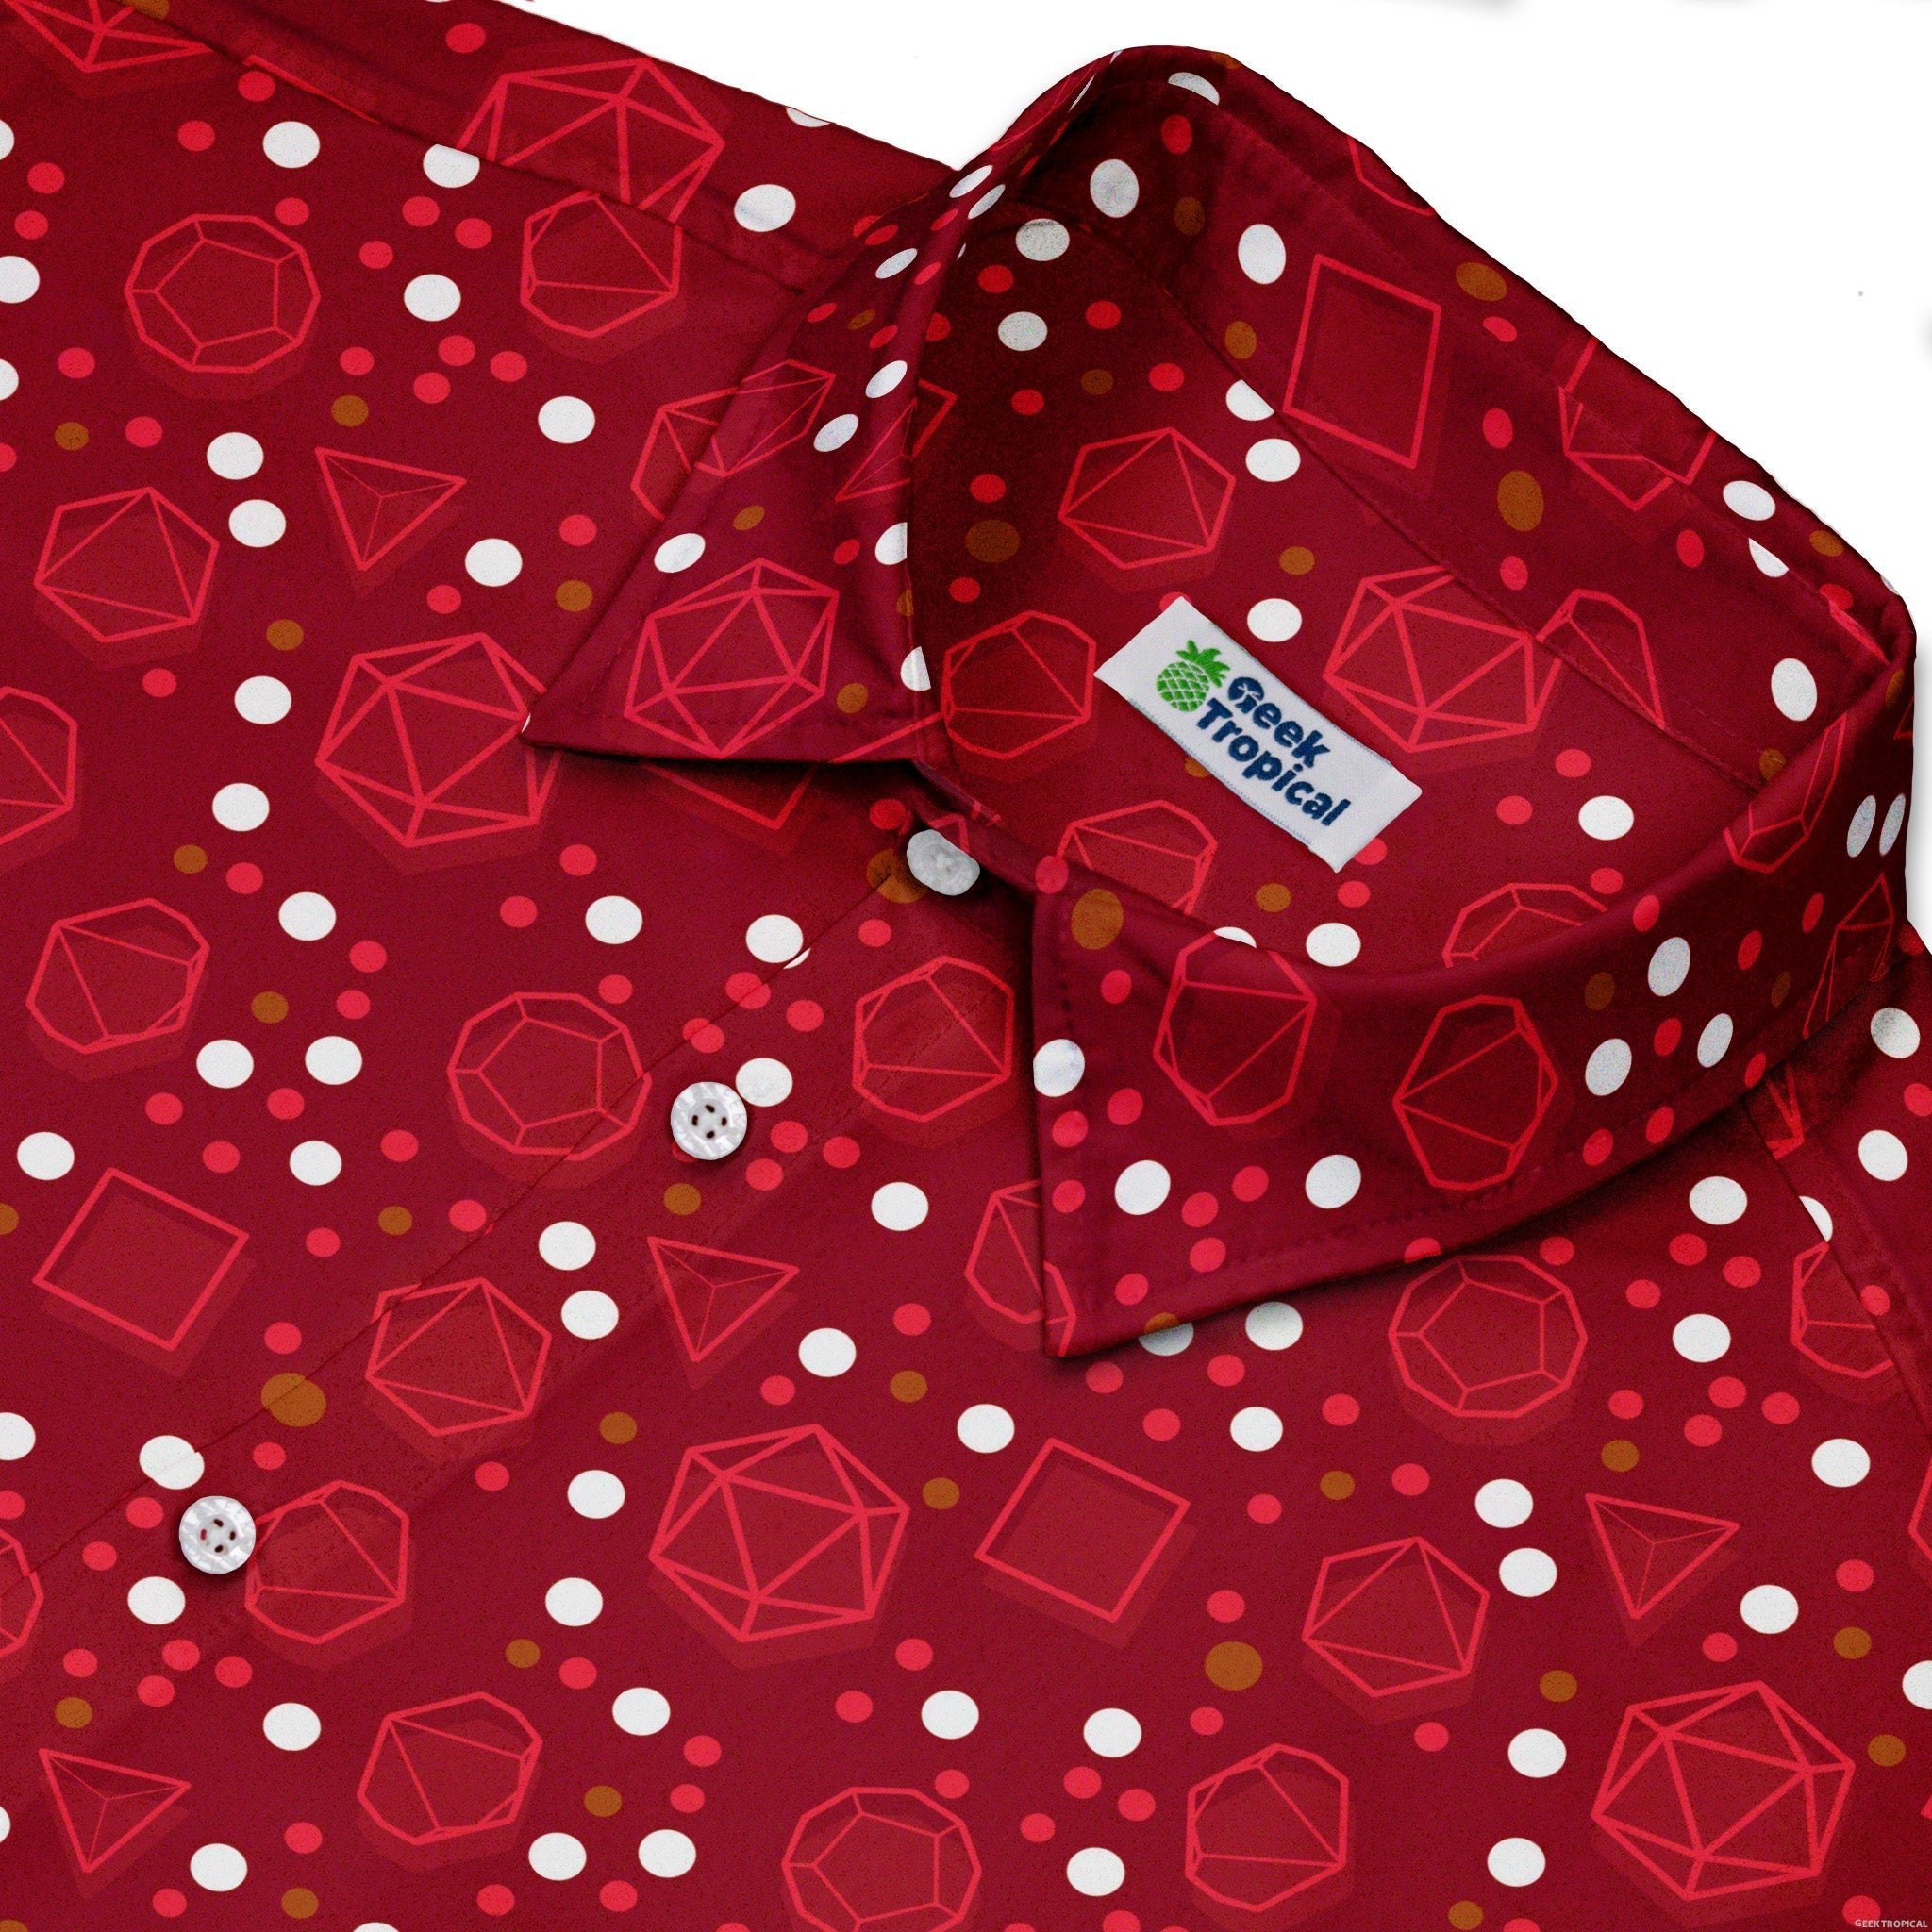 Dnd Red Dice Sets Button Up Shirt - adult sizing - Design by Heather Davenport - dnd & rpg print